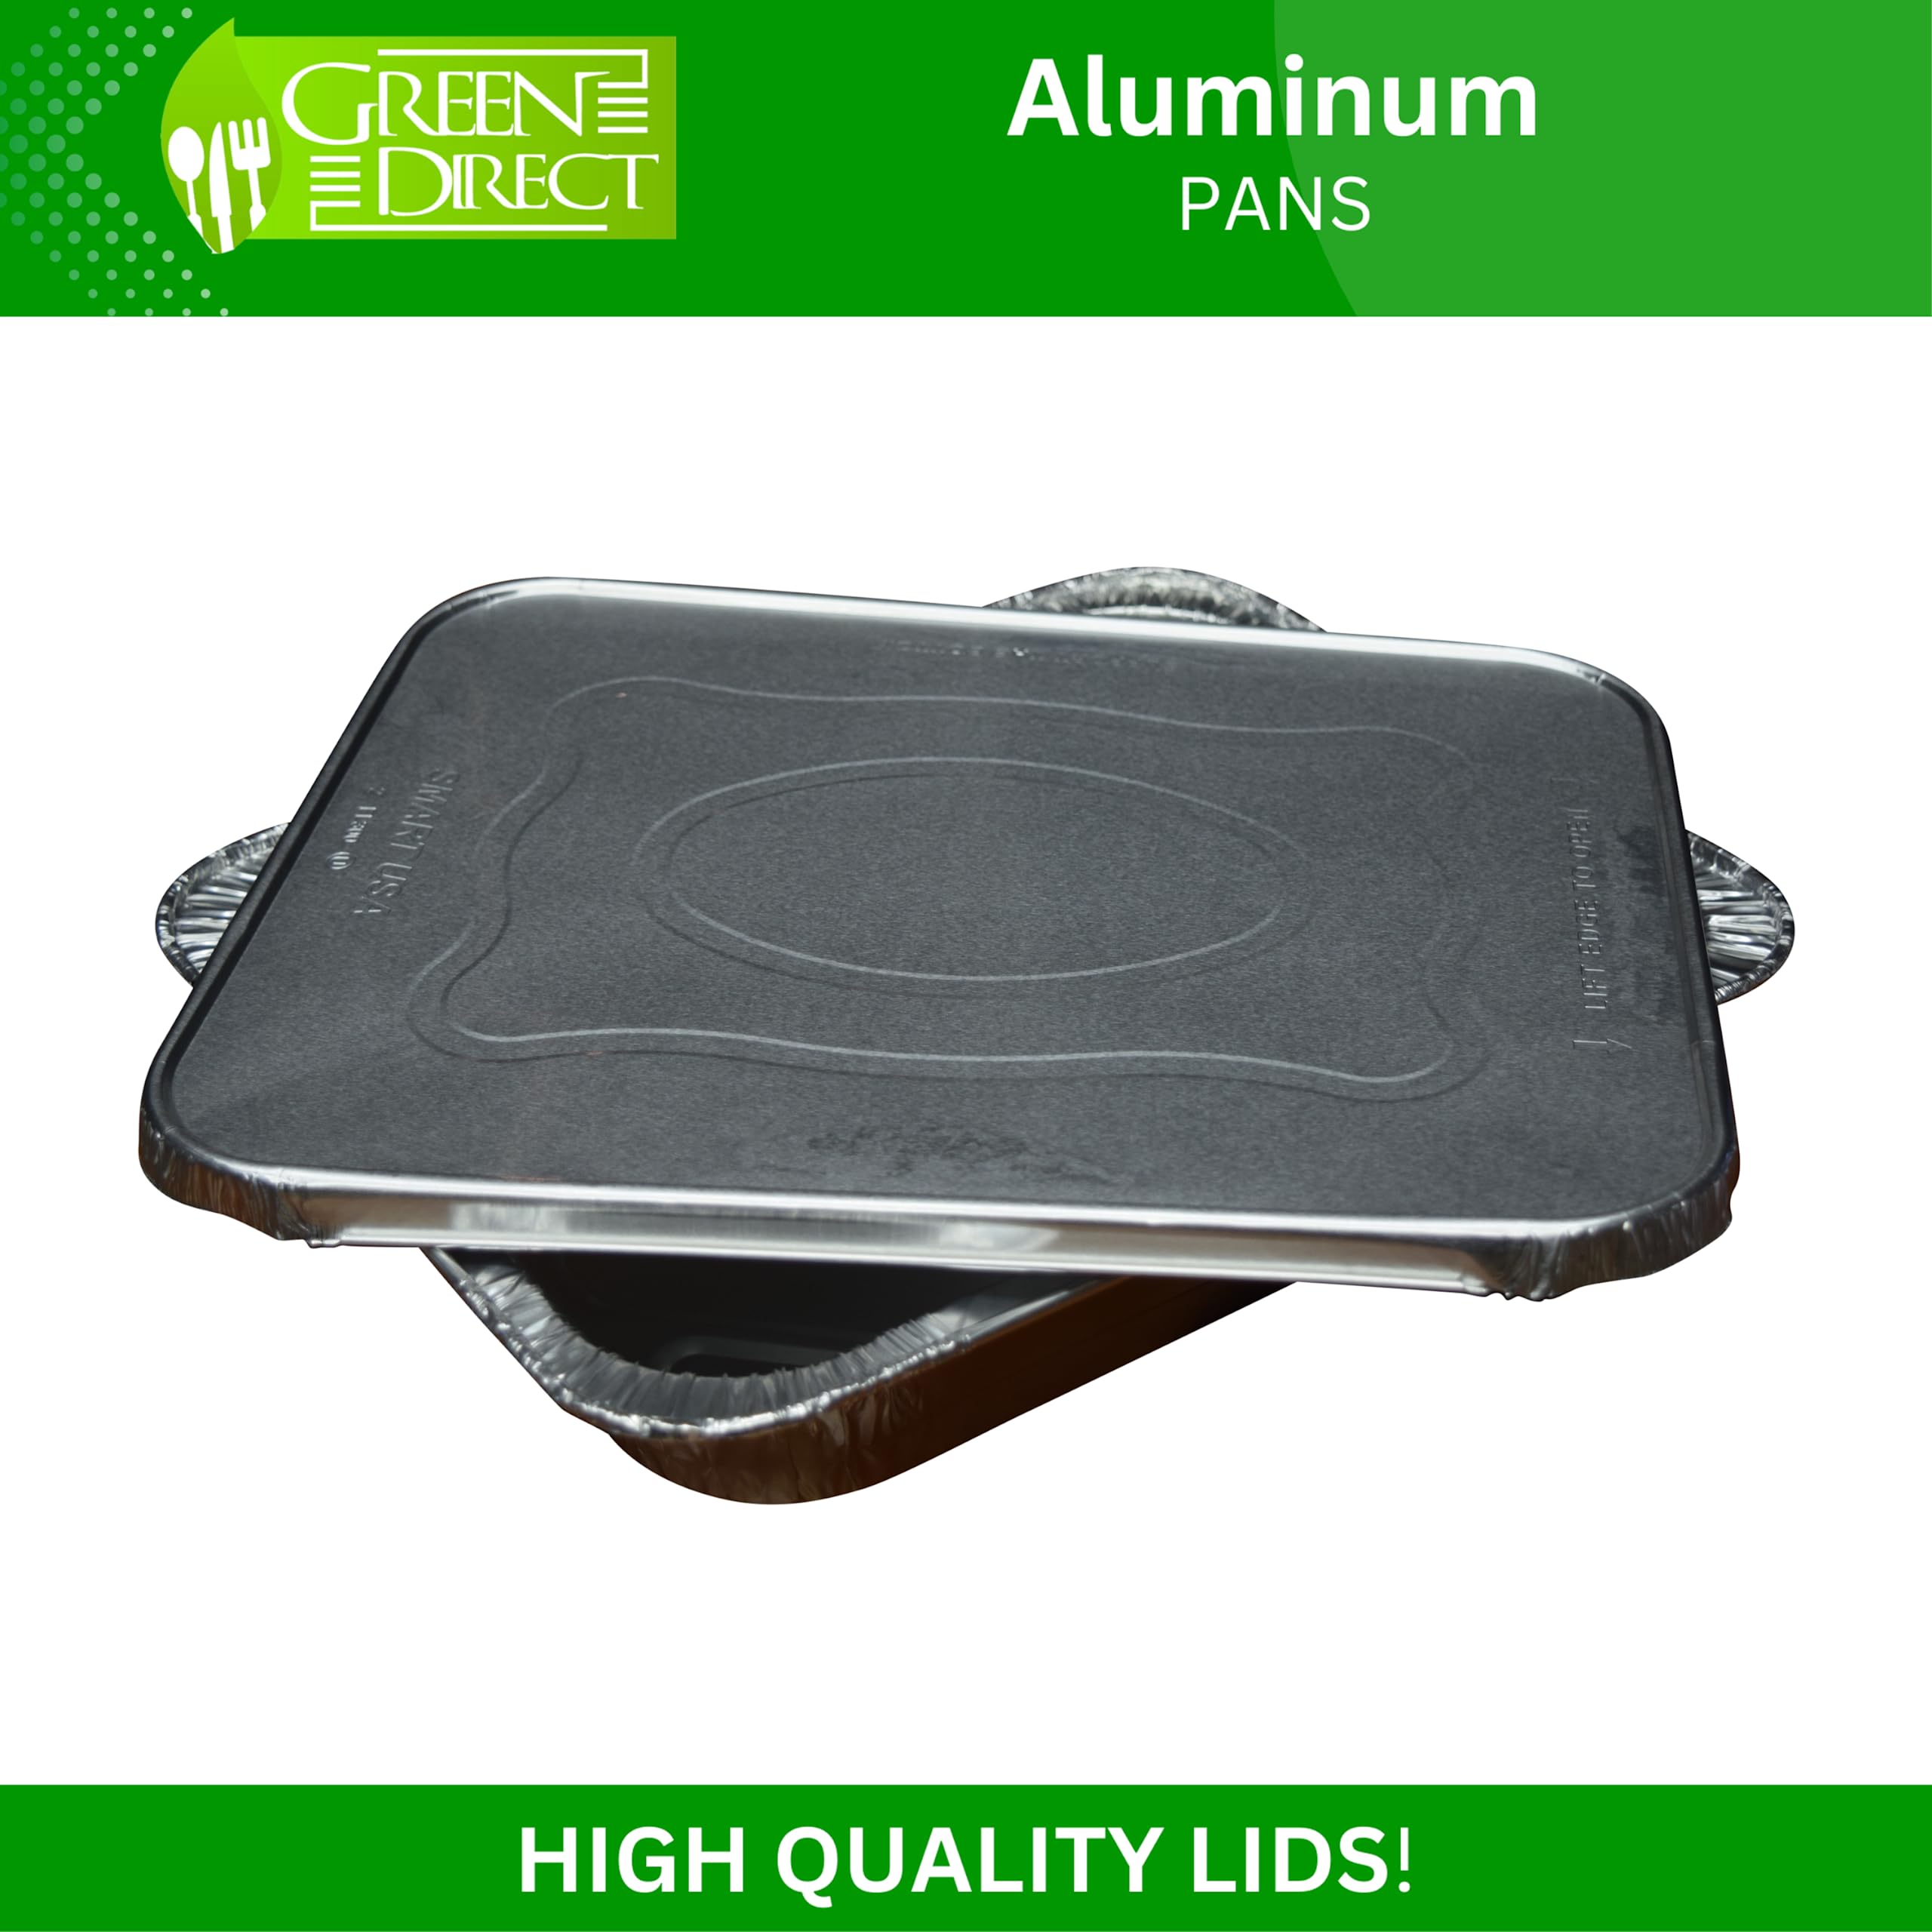 Green Direct Disposable Aluminum Foil Baking Pans with Lids - Half Size (9 x 13 inch) Roasting pan with covers for all kitchen & cooking needs, Pack of 10 pans and 10 lids